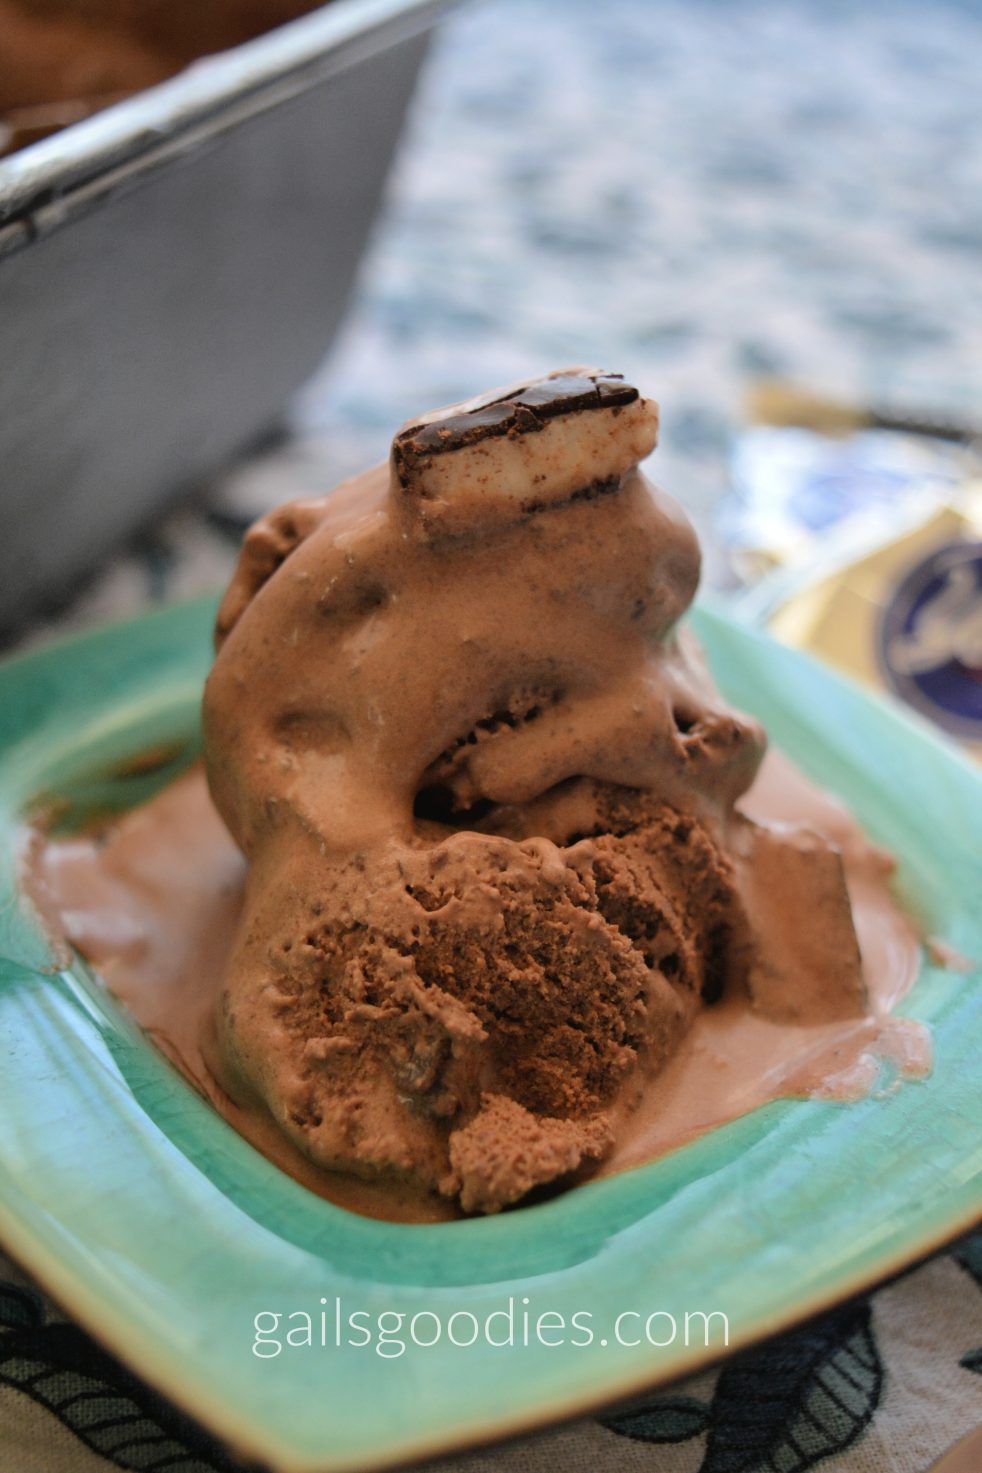 A green bowl holds two scoops of chocolate peppermint patty ice-cream. The top scoop is partly melted revealing a peppermint pattie piece on top and in the middle. The bottom scoop is solid showing a creamy chocolate ice-cream.